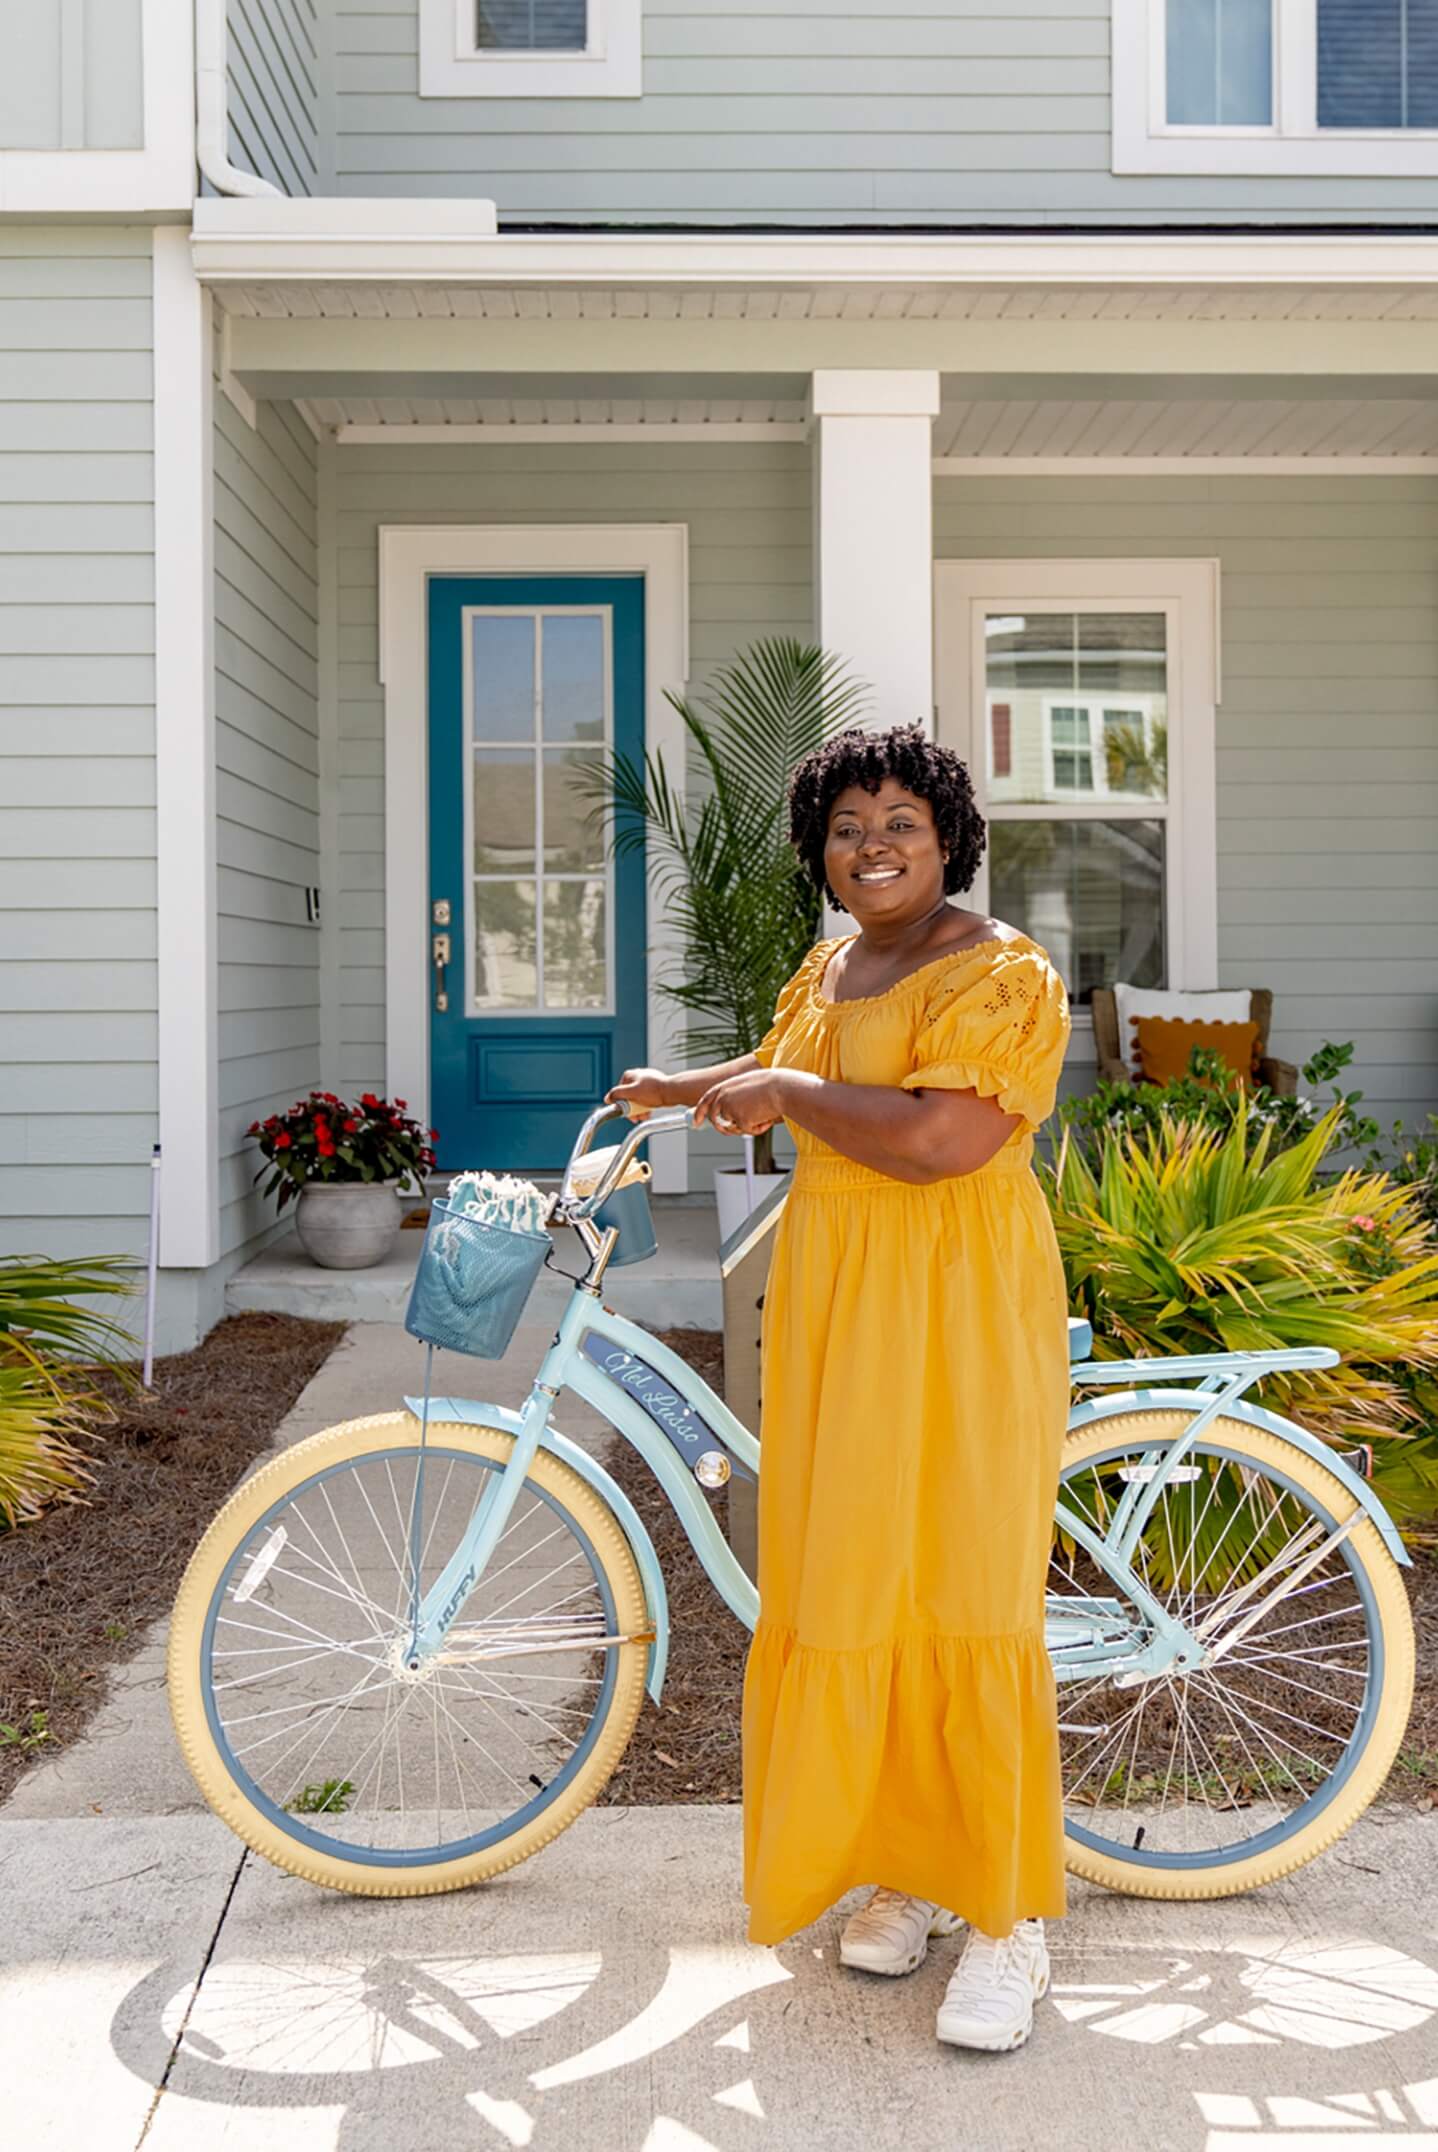 A woman in a yellow dress standing in front of a house with a blue bicycle.